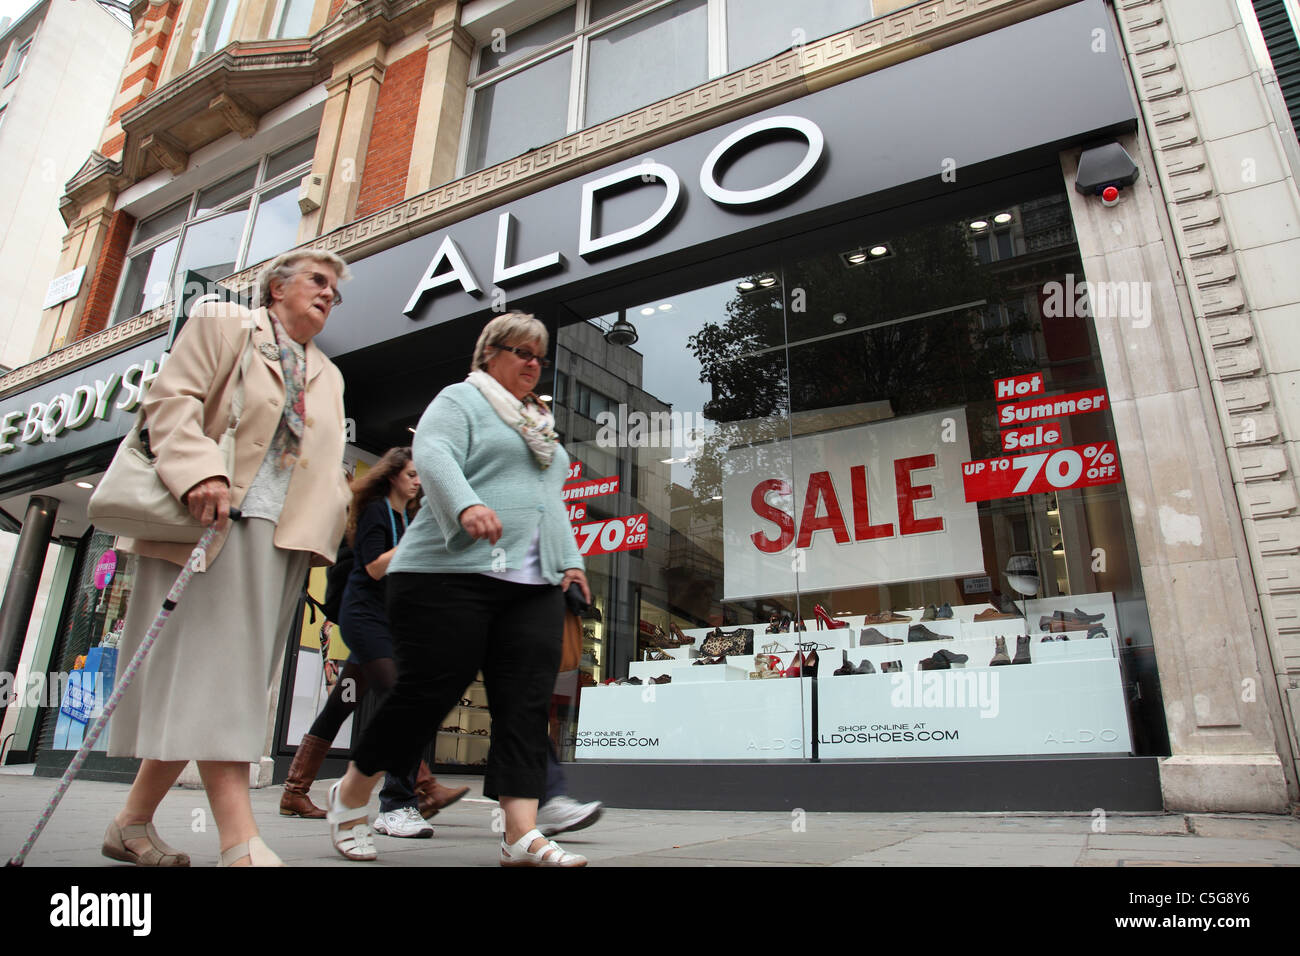 The Aldo Sale Shop High Resolution Stock Photography and Images - Alamy